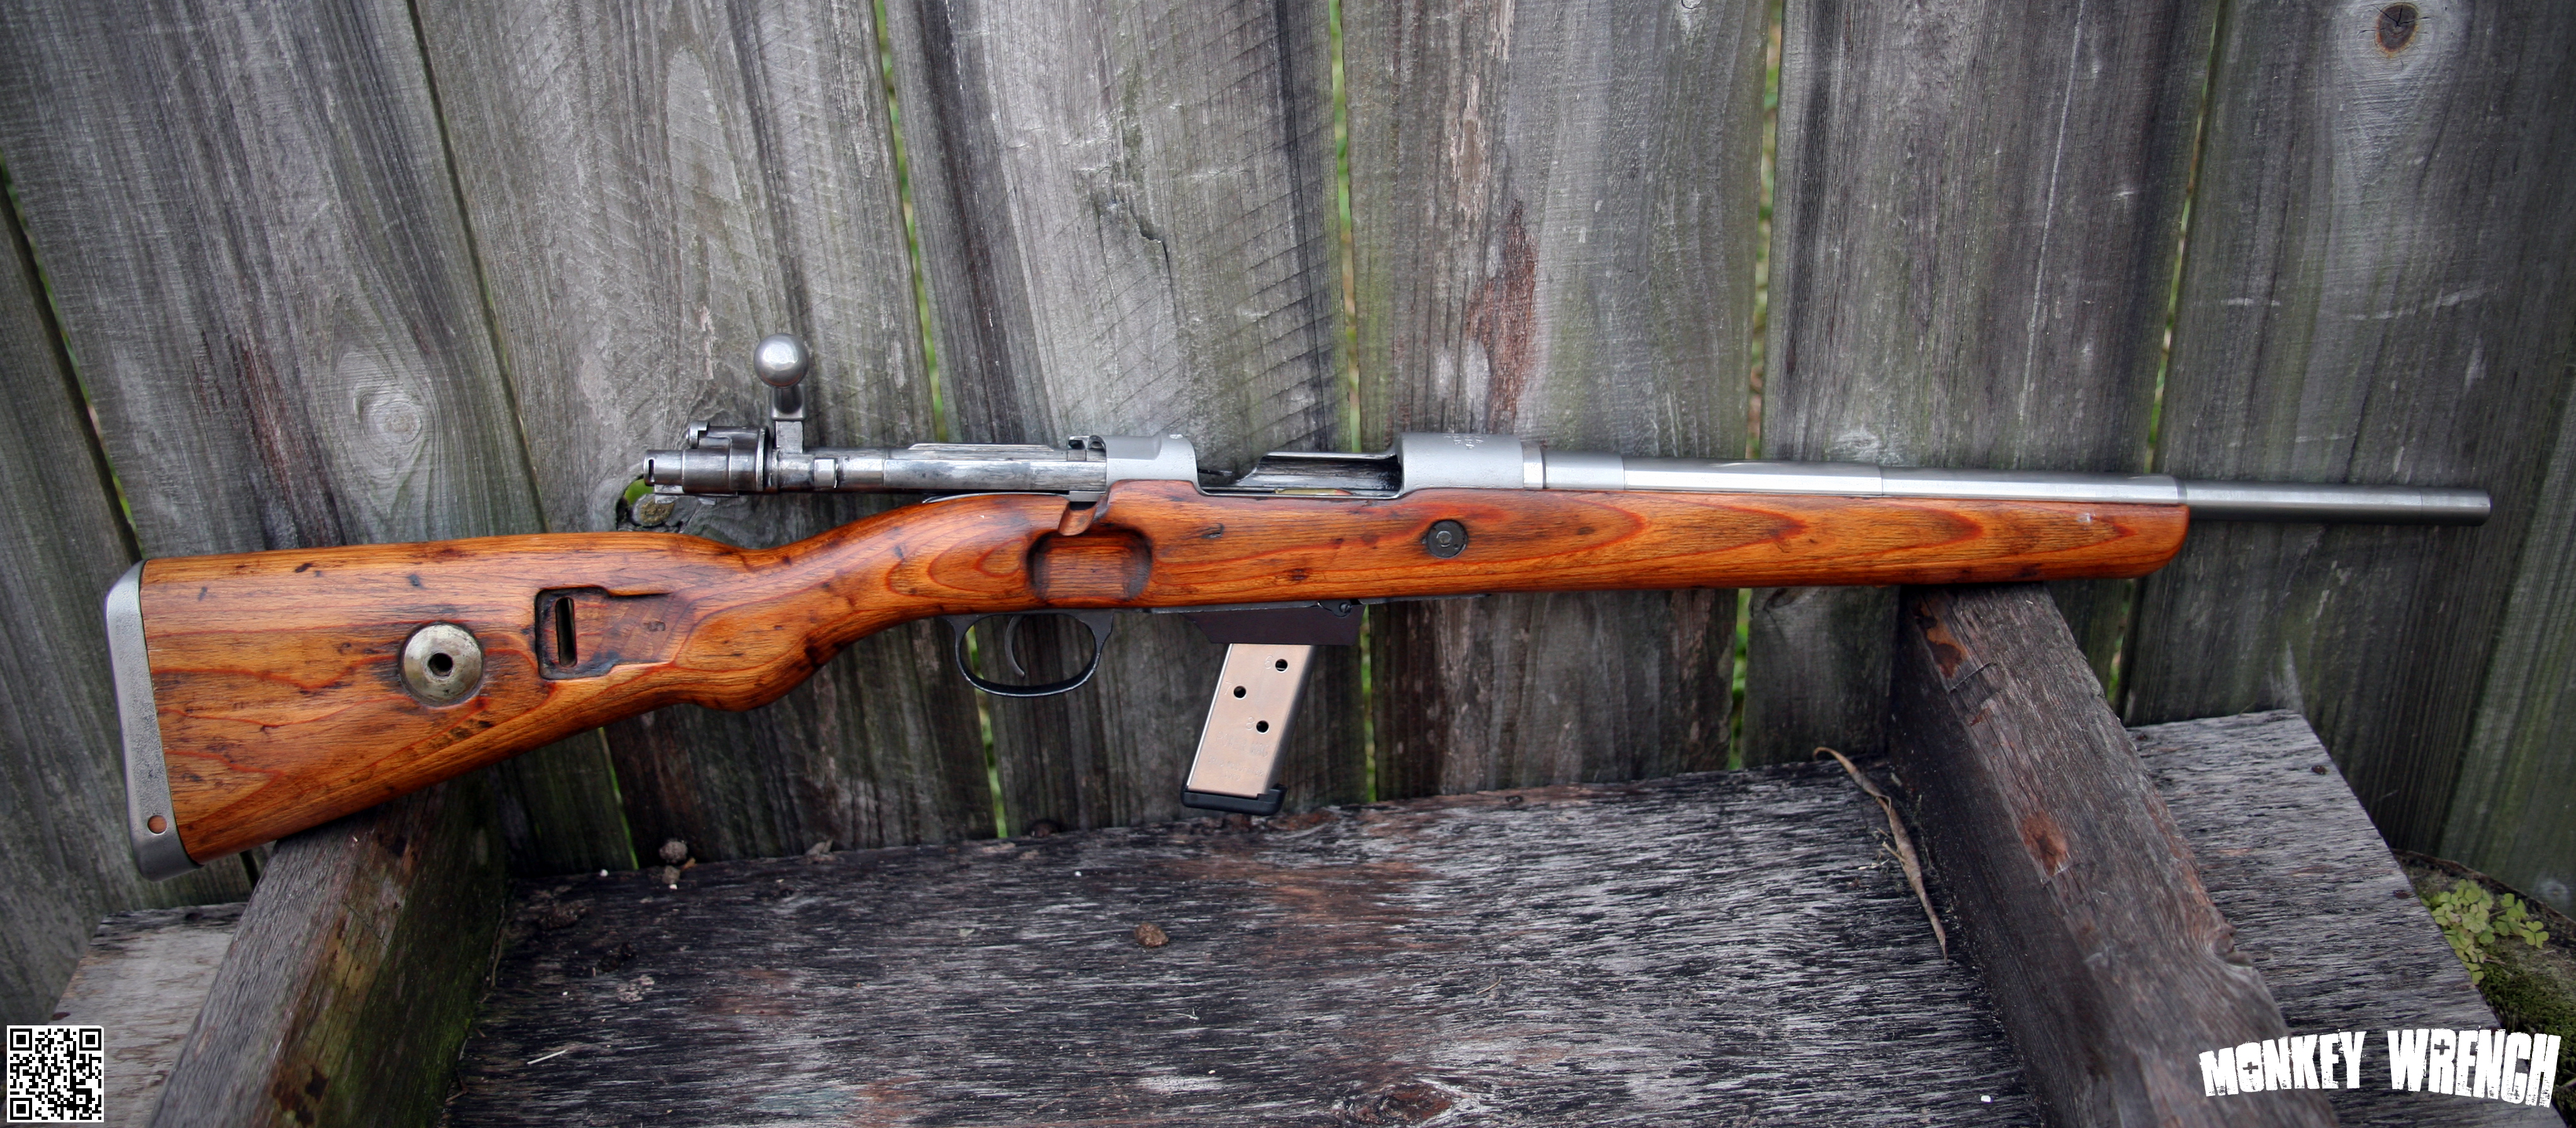 What is everyone's favorite milsurp rifles and post up a pic Yugo M48.